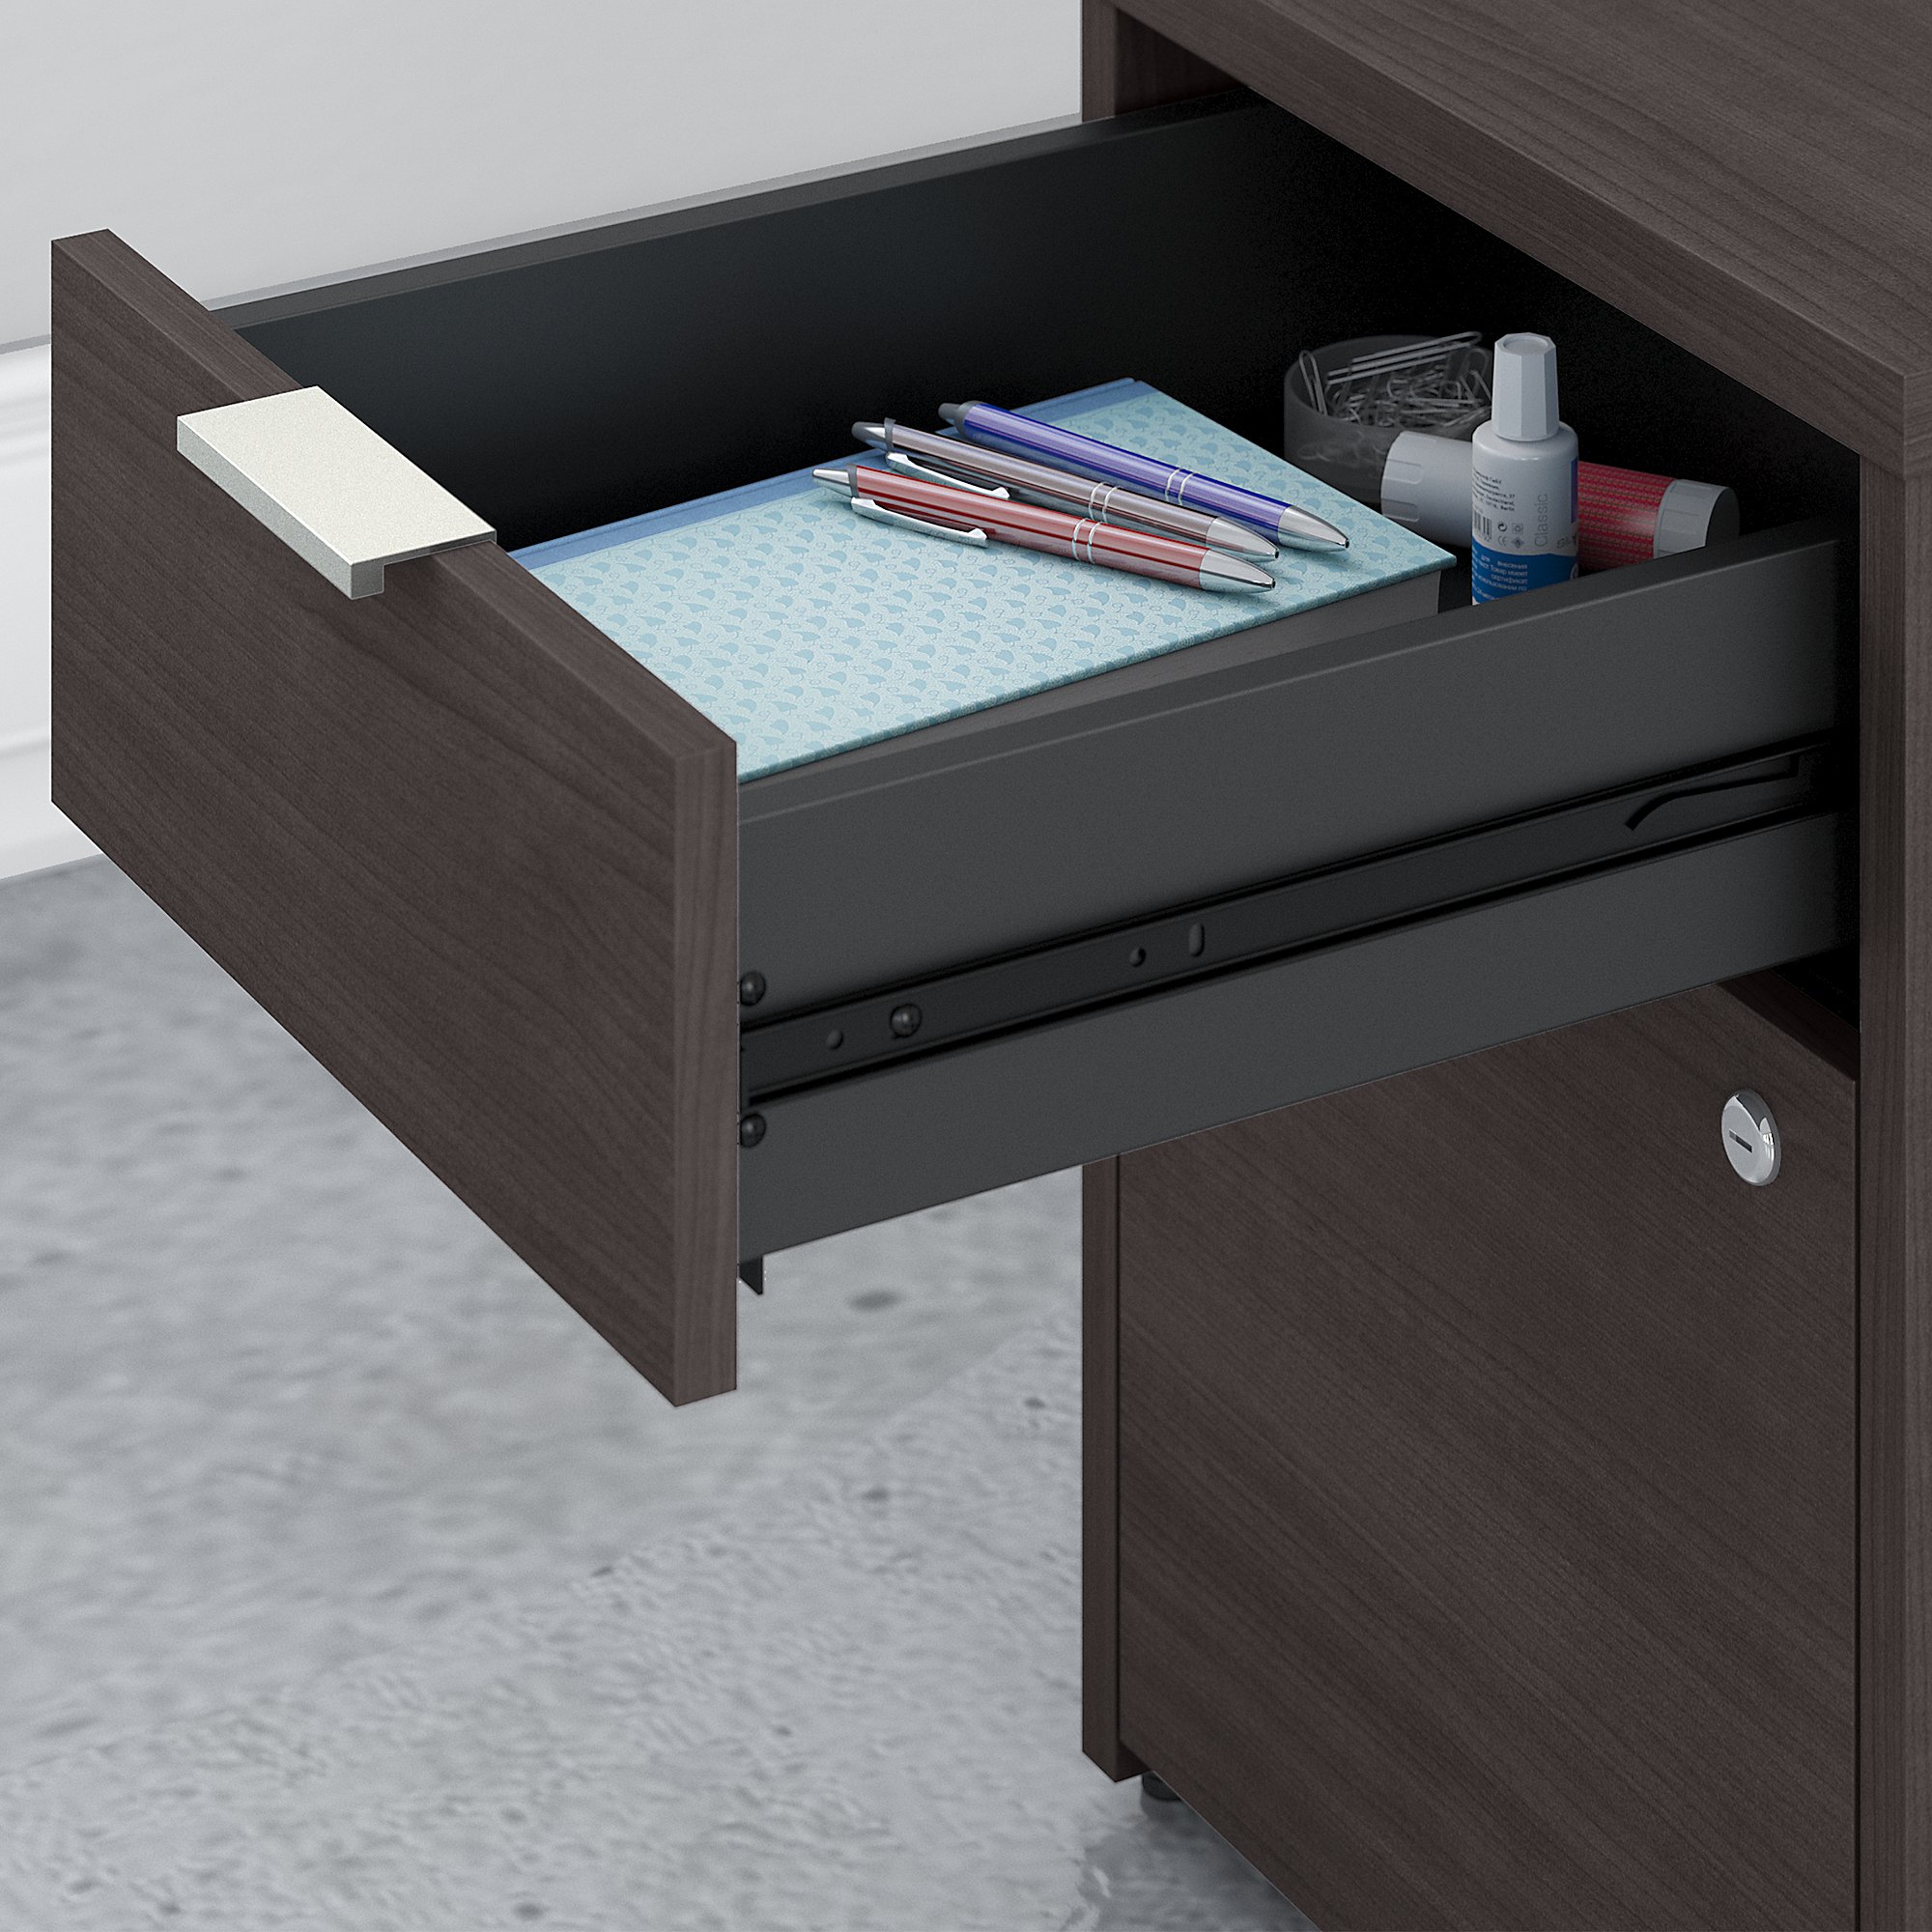 Home office furniture desk 2 drawers and cabinet upper drawer